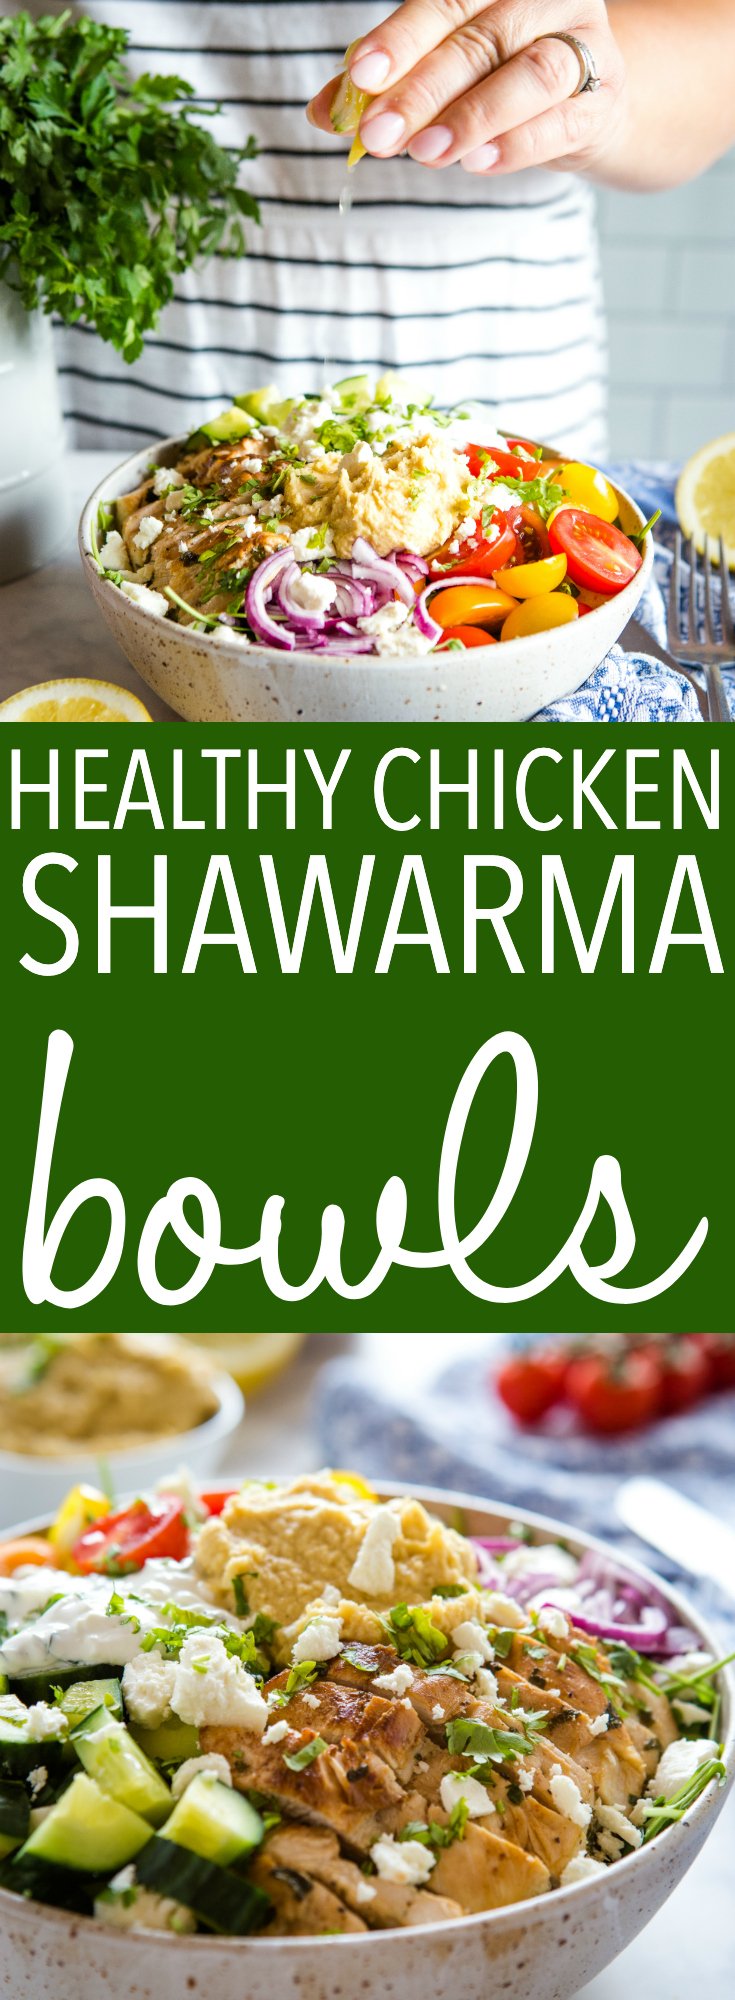 These Low Carb Chicken Shawarma Bowls make the perfect healthy lunch or dinner that's packed with veggies and protein without all the carbs! Perfect for meal prep! Recipe from thebusybaker.ca! #recipe #chicken #shawarma #bowls #oneserving #familymeal #keto #lowcarb #healthy #veggies #mealprep #easy #simple #foodblog via @busybakerblog